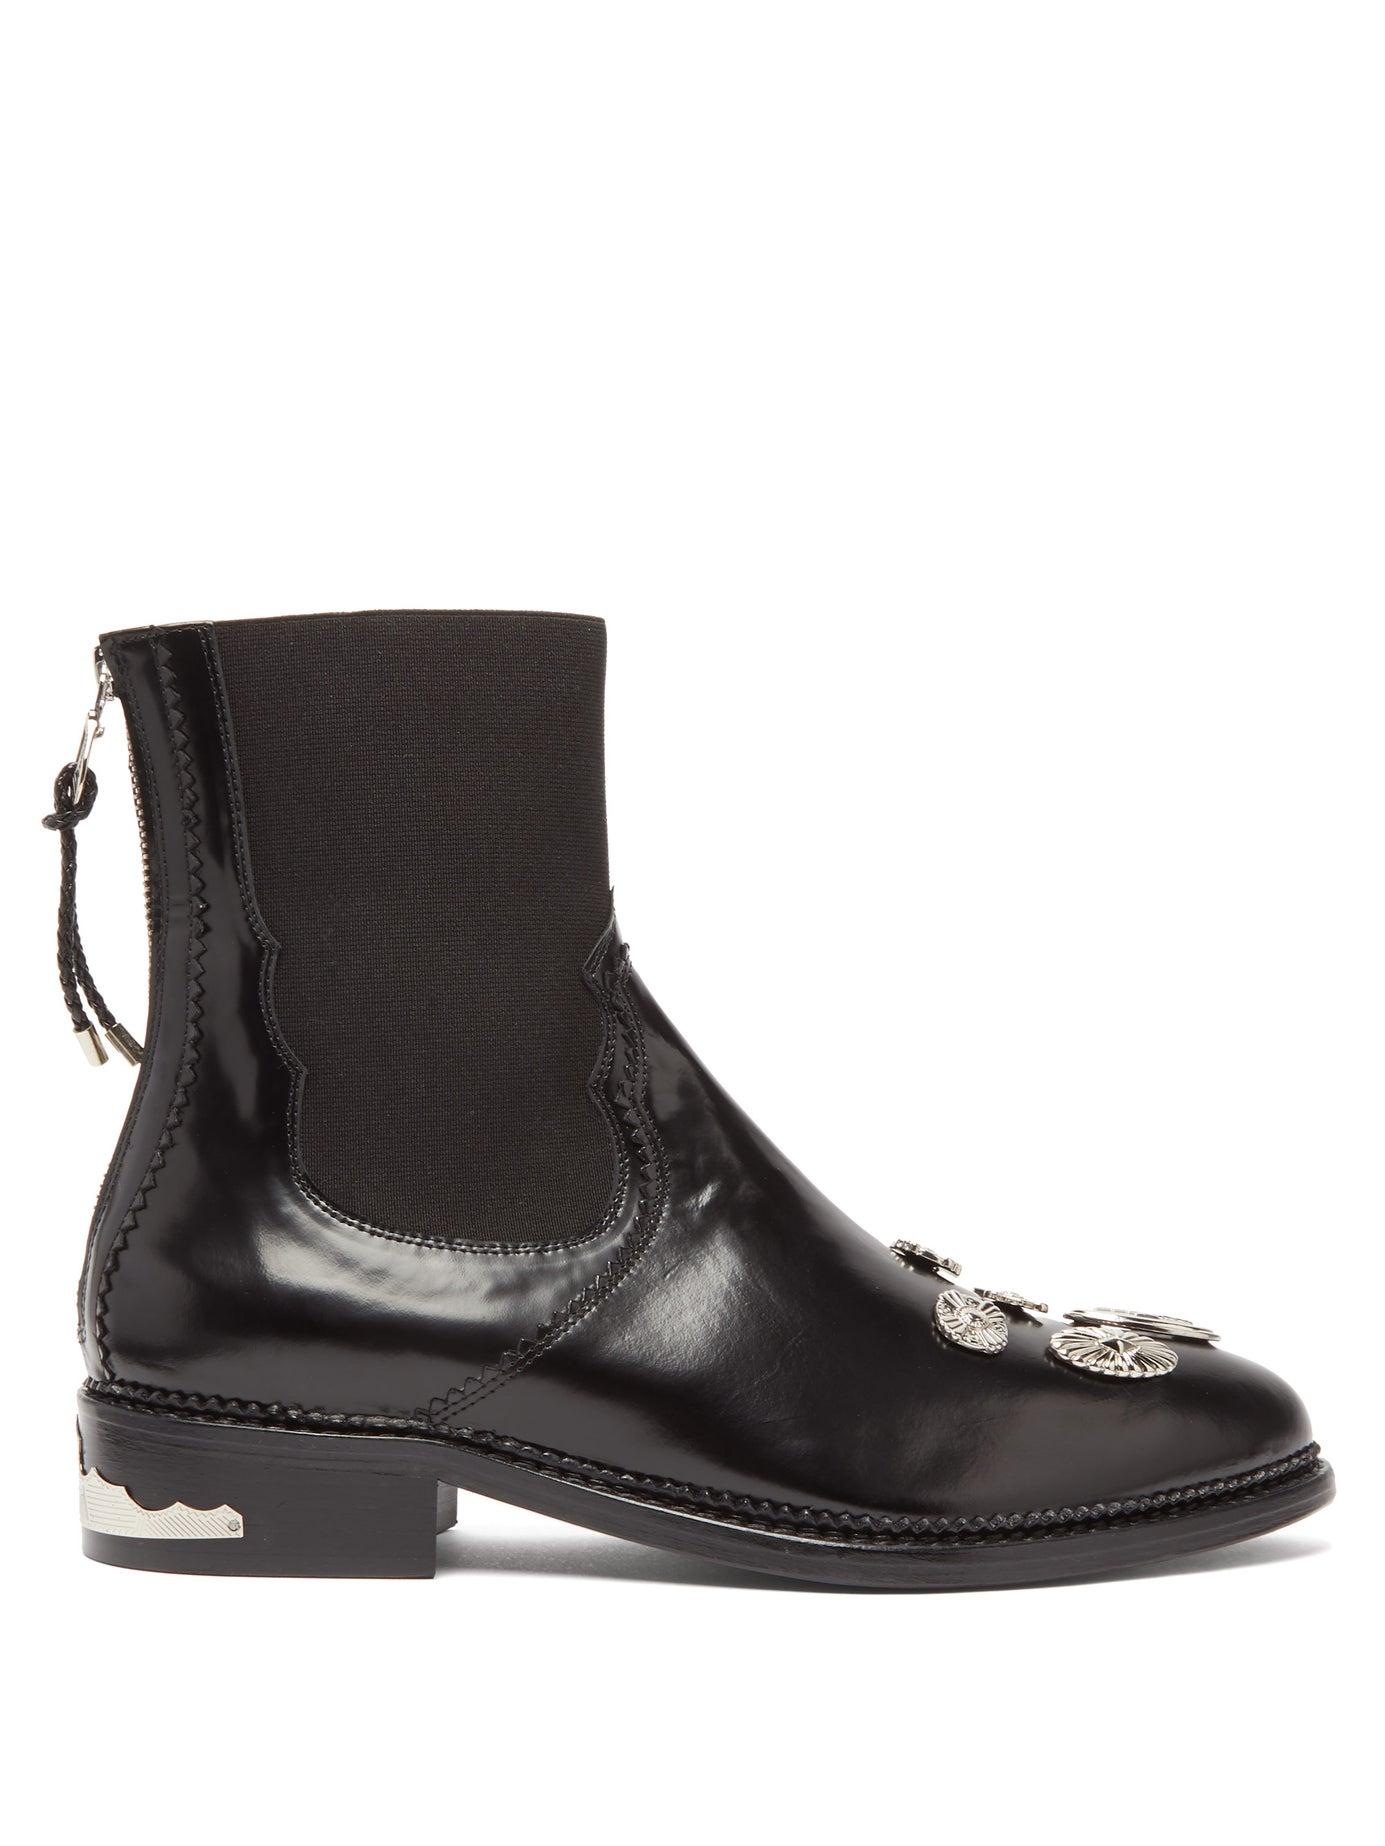 Toga Western Badge Embellished Leather Chelsea Boots in Black - Lyst